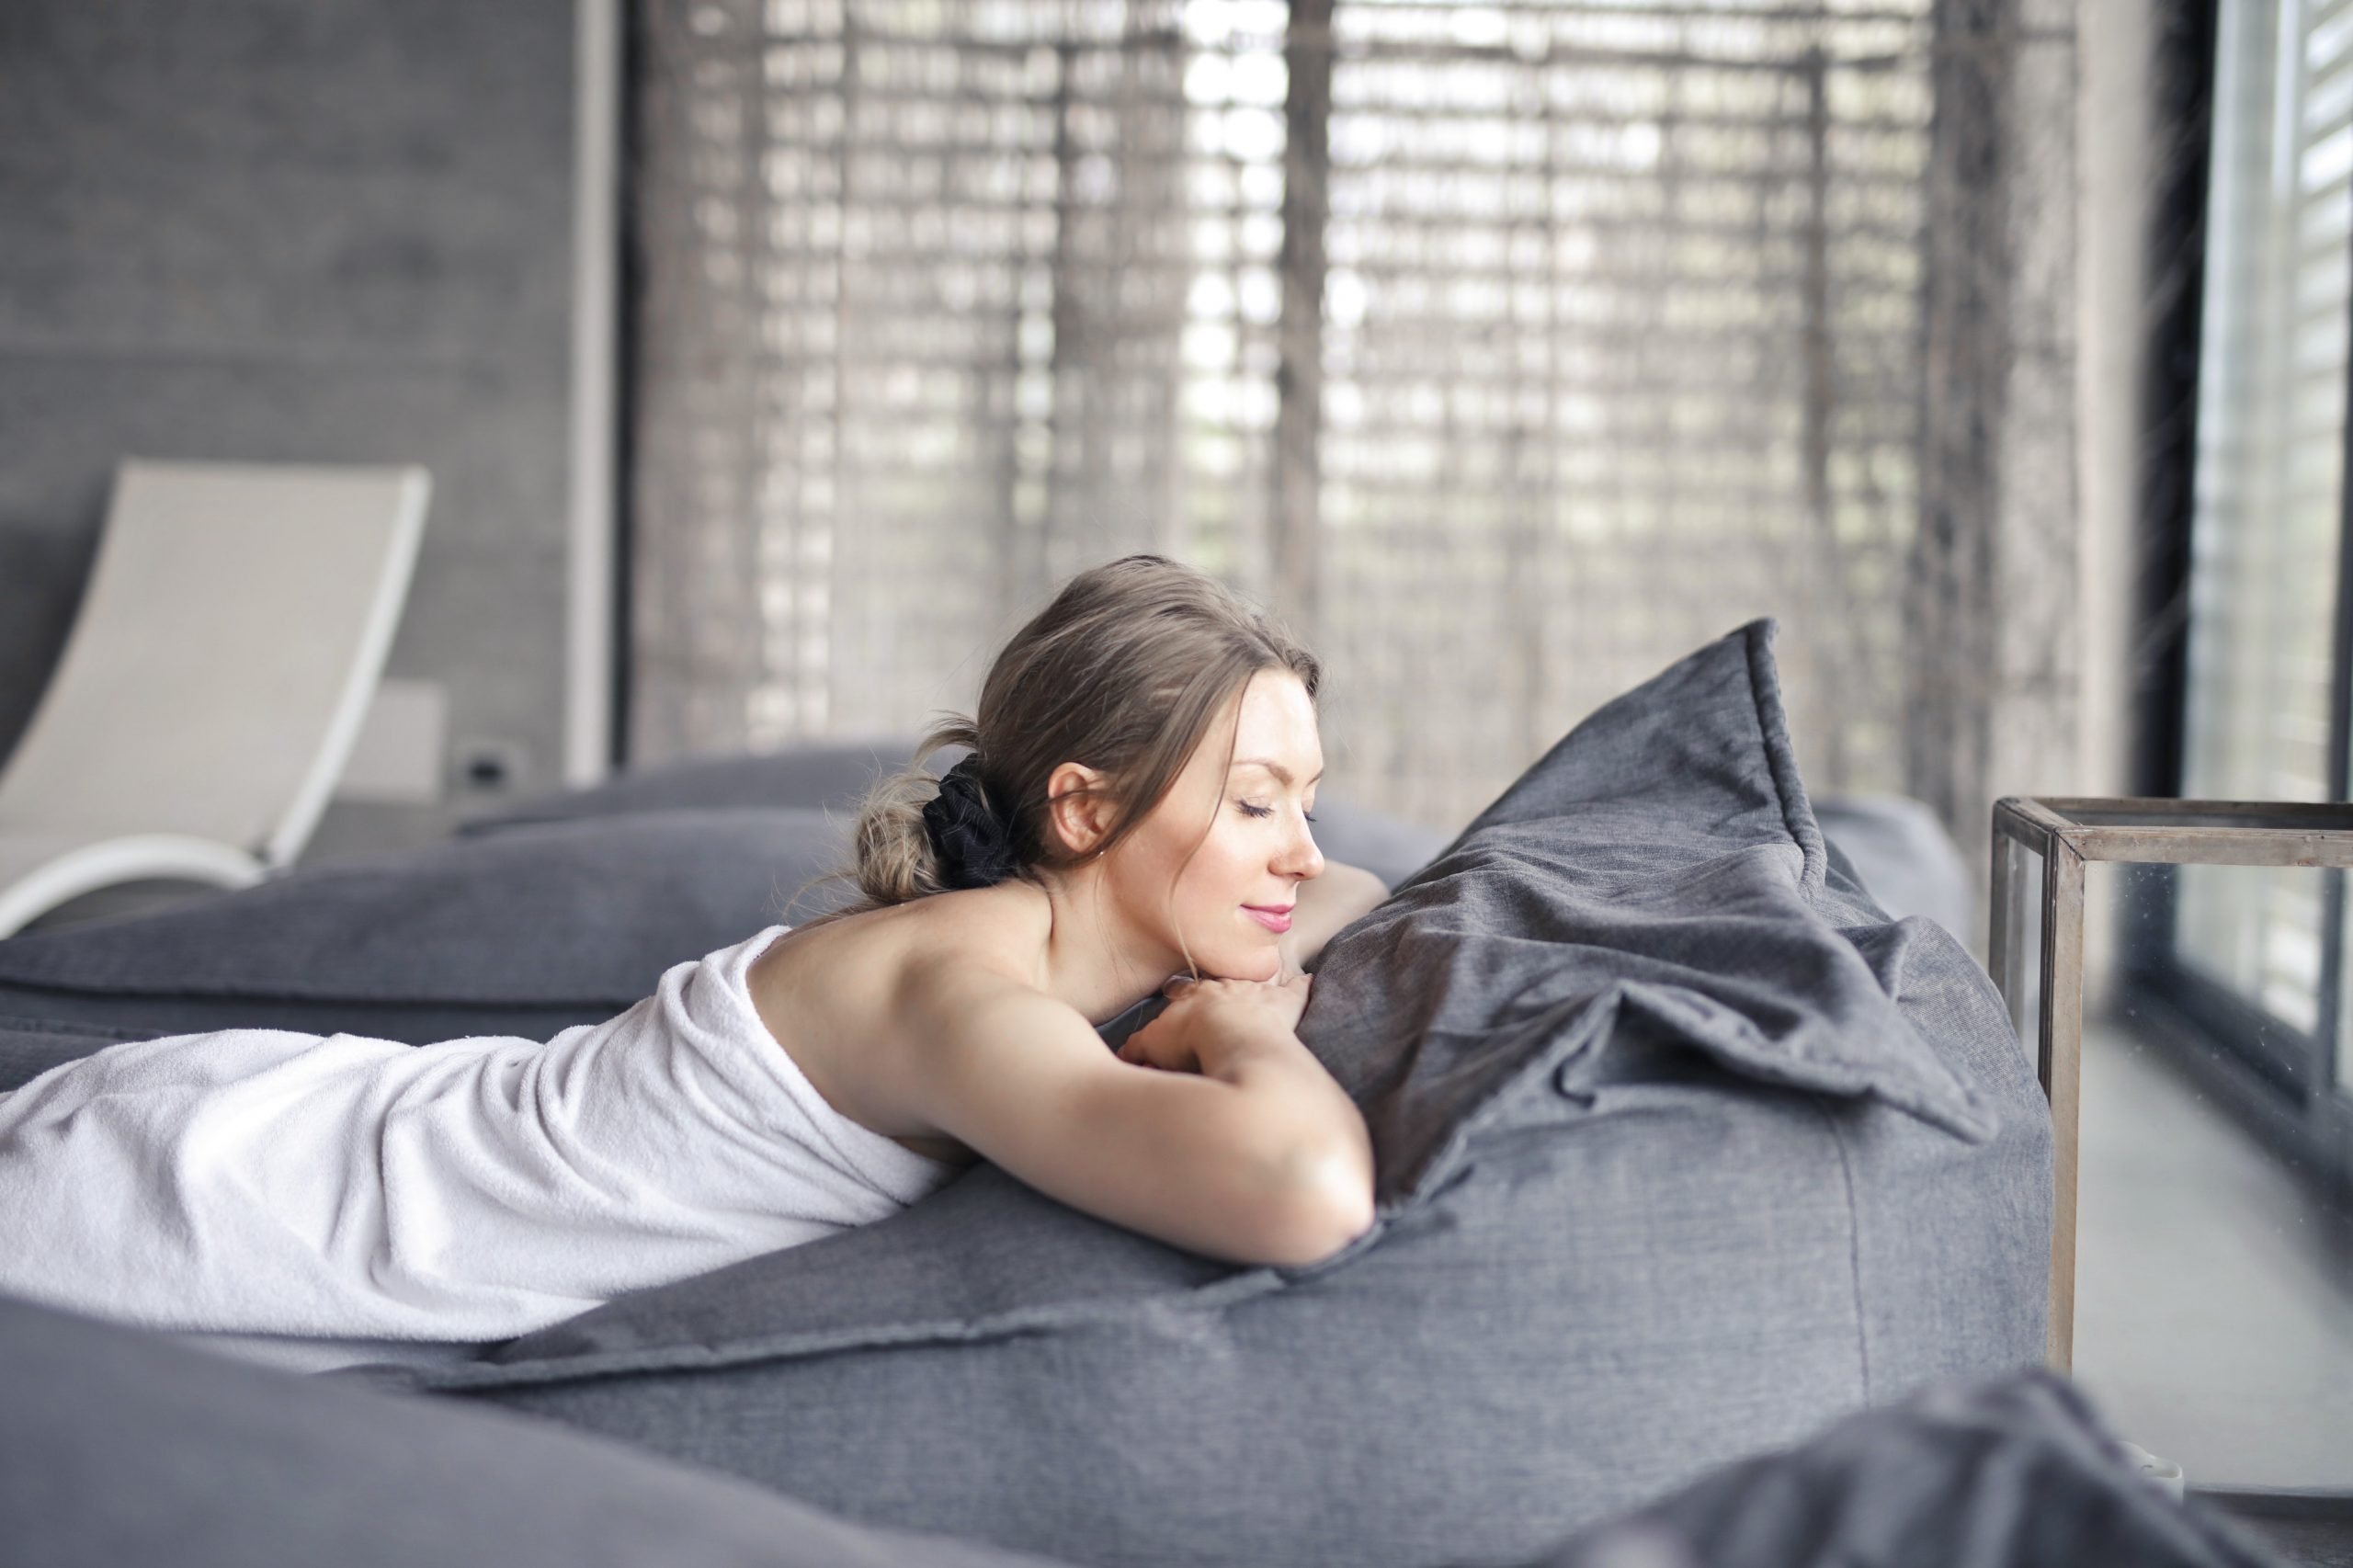 An image of a lady relaxing on a grey bed.